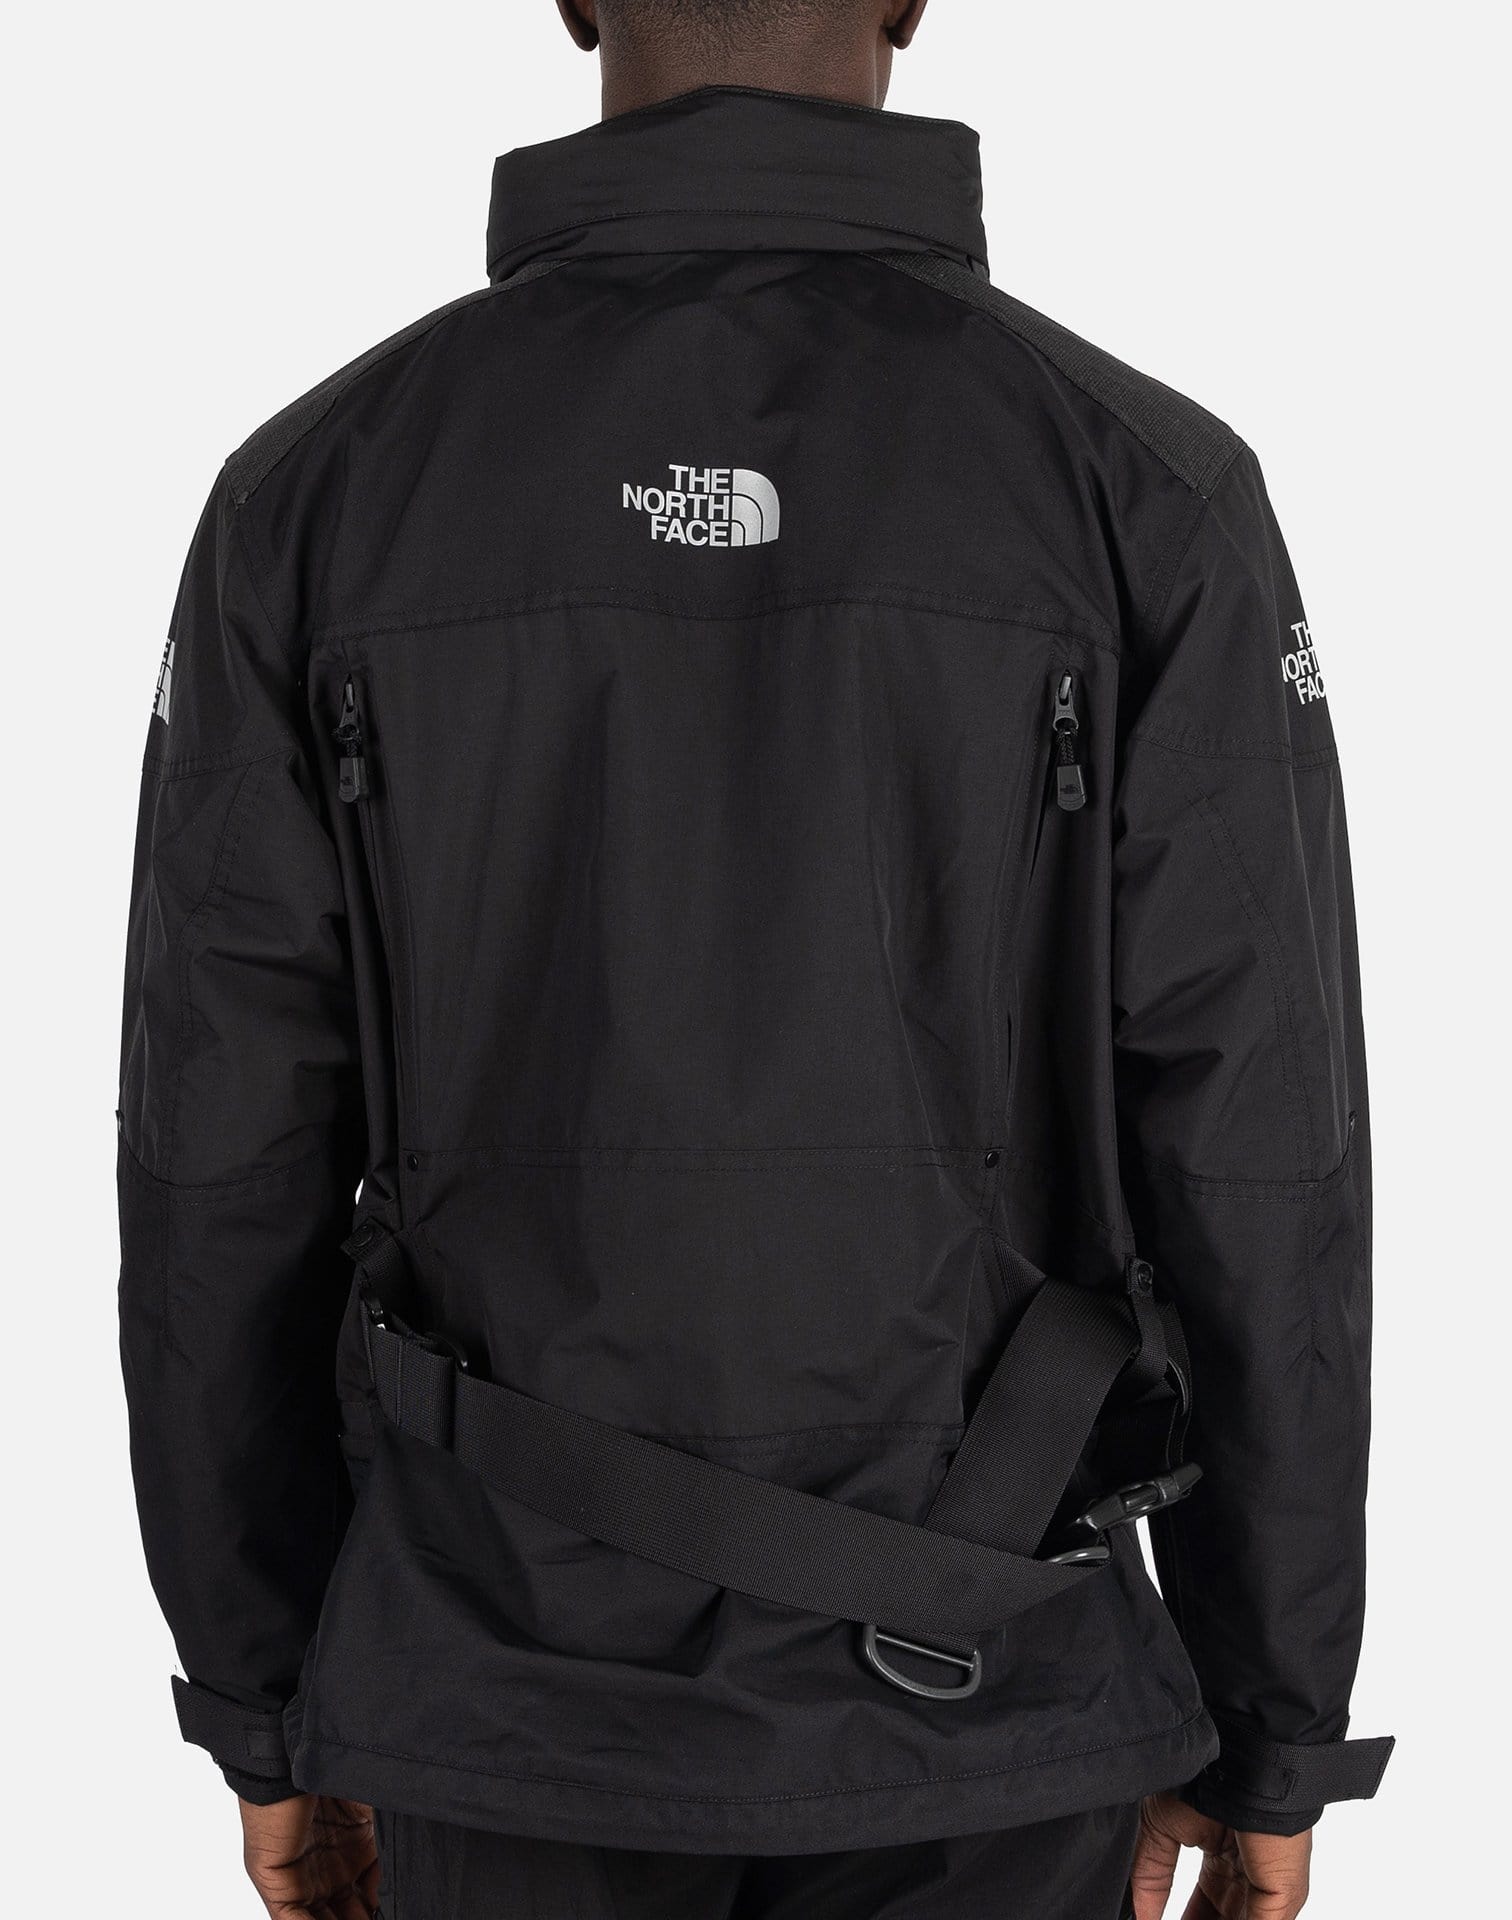 The North Face STEEP TECH JACKET – DTLR